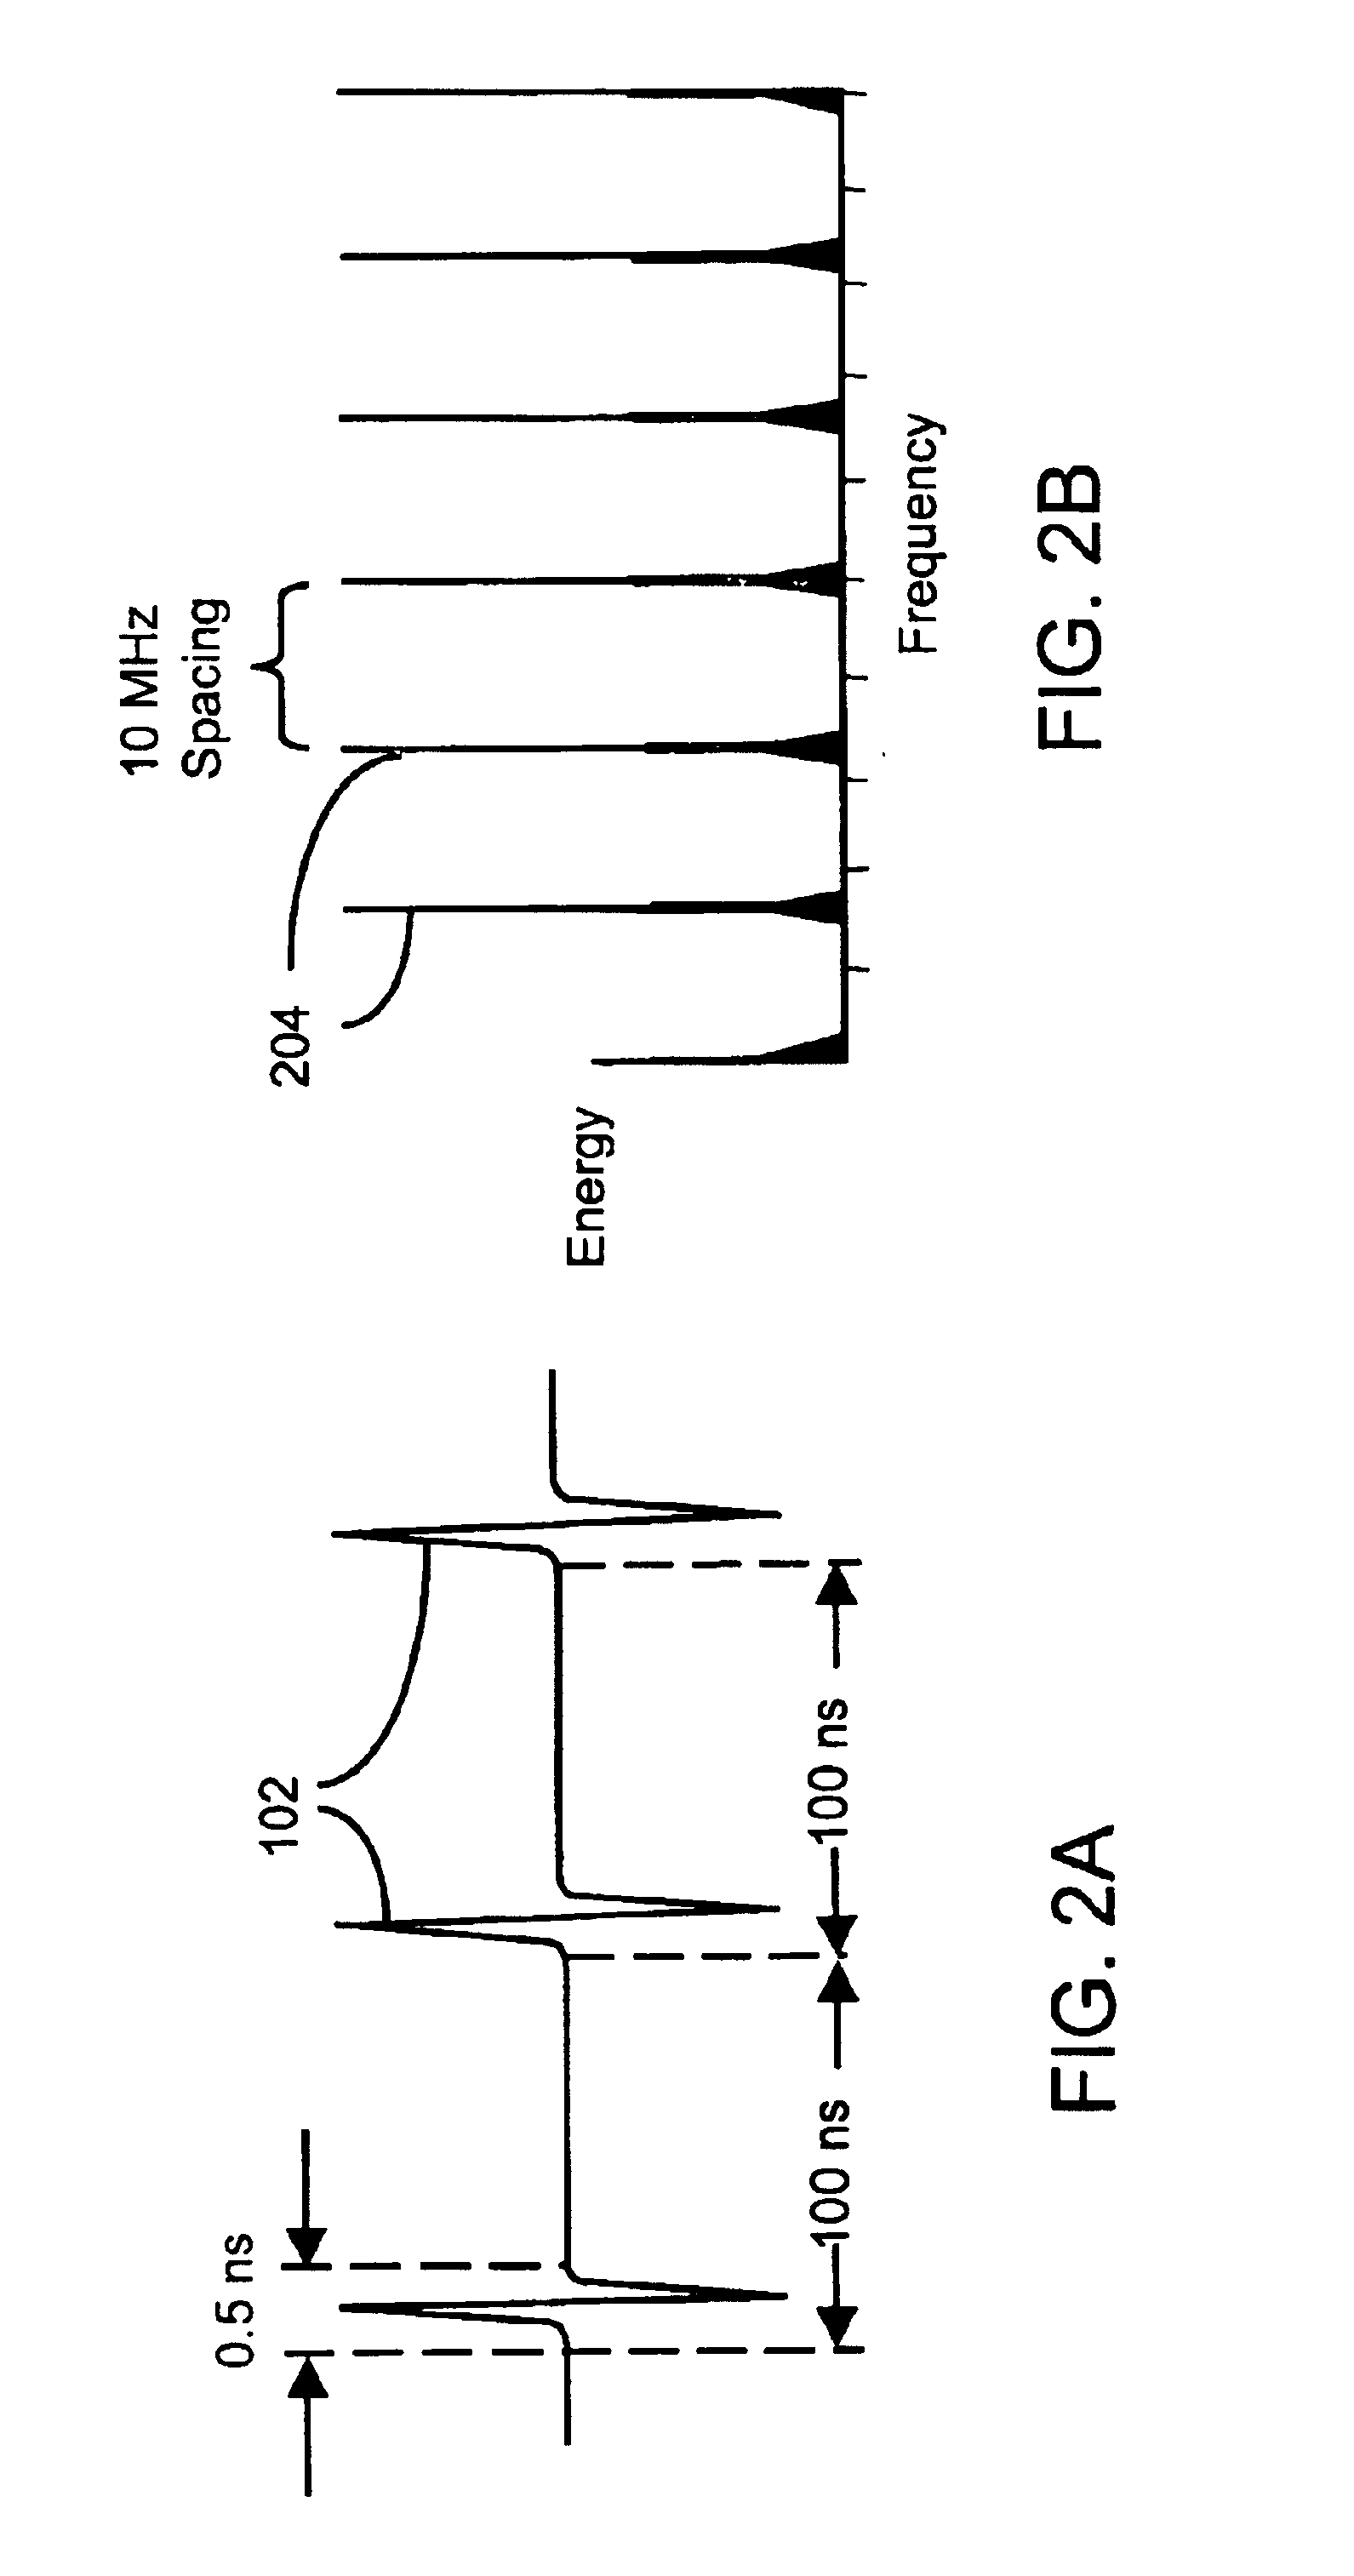 Direct-path-signal detection apparatus and associated methods